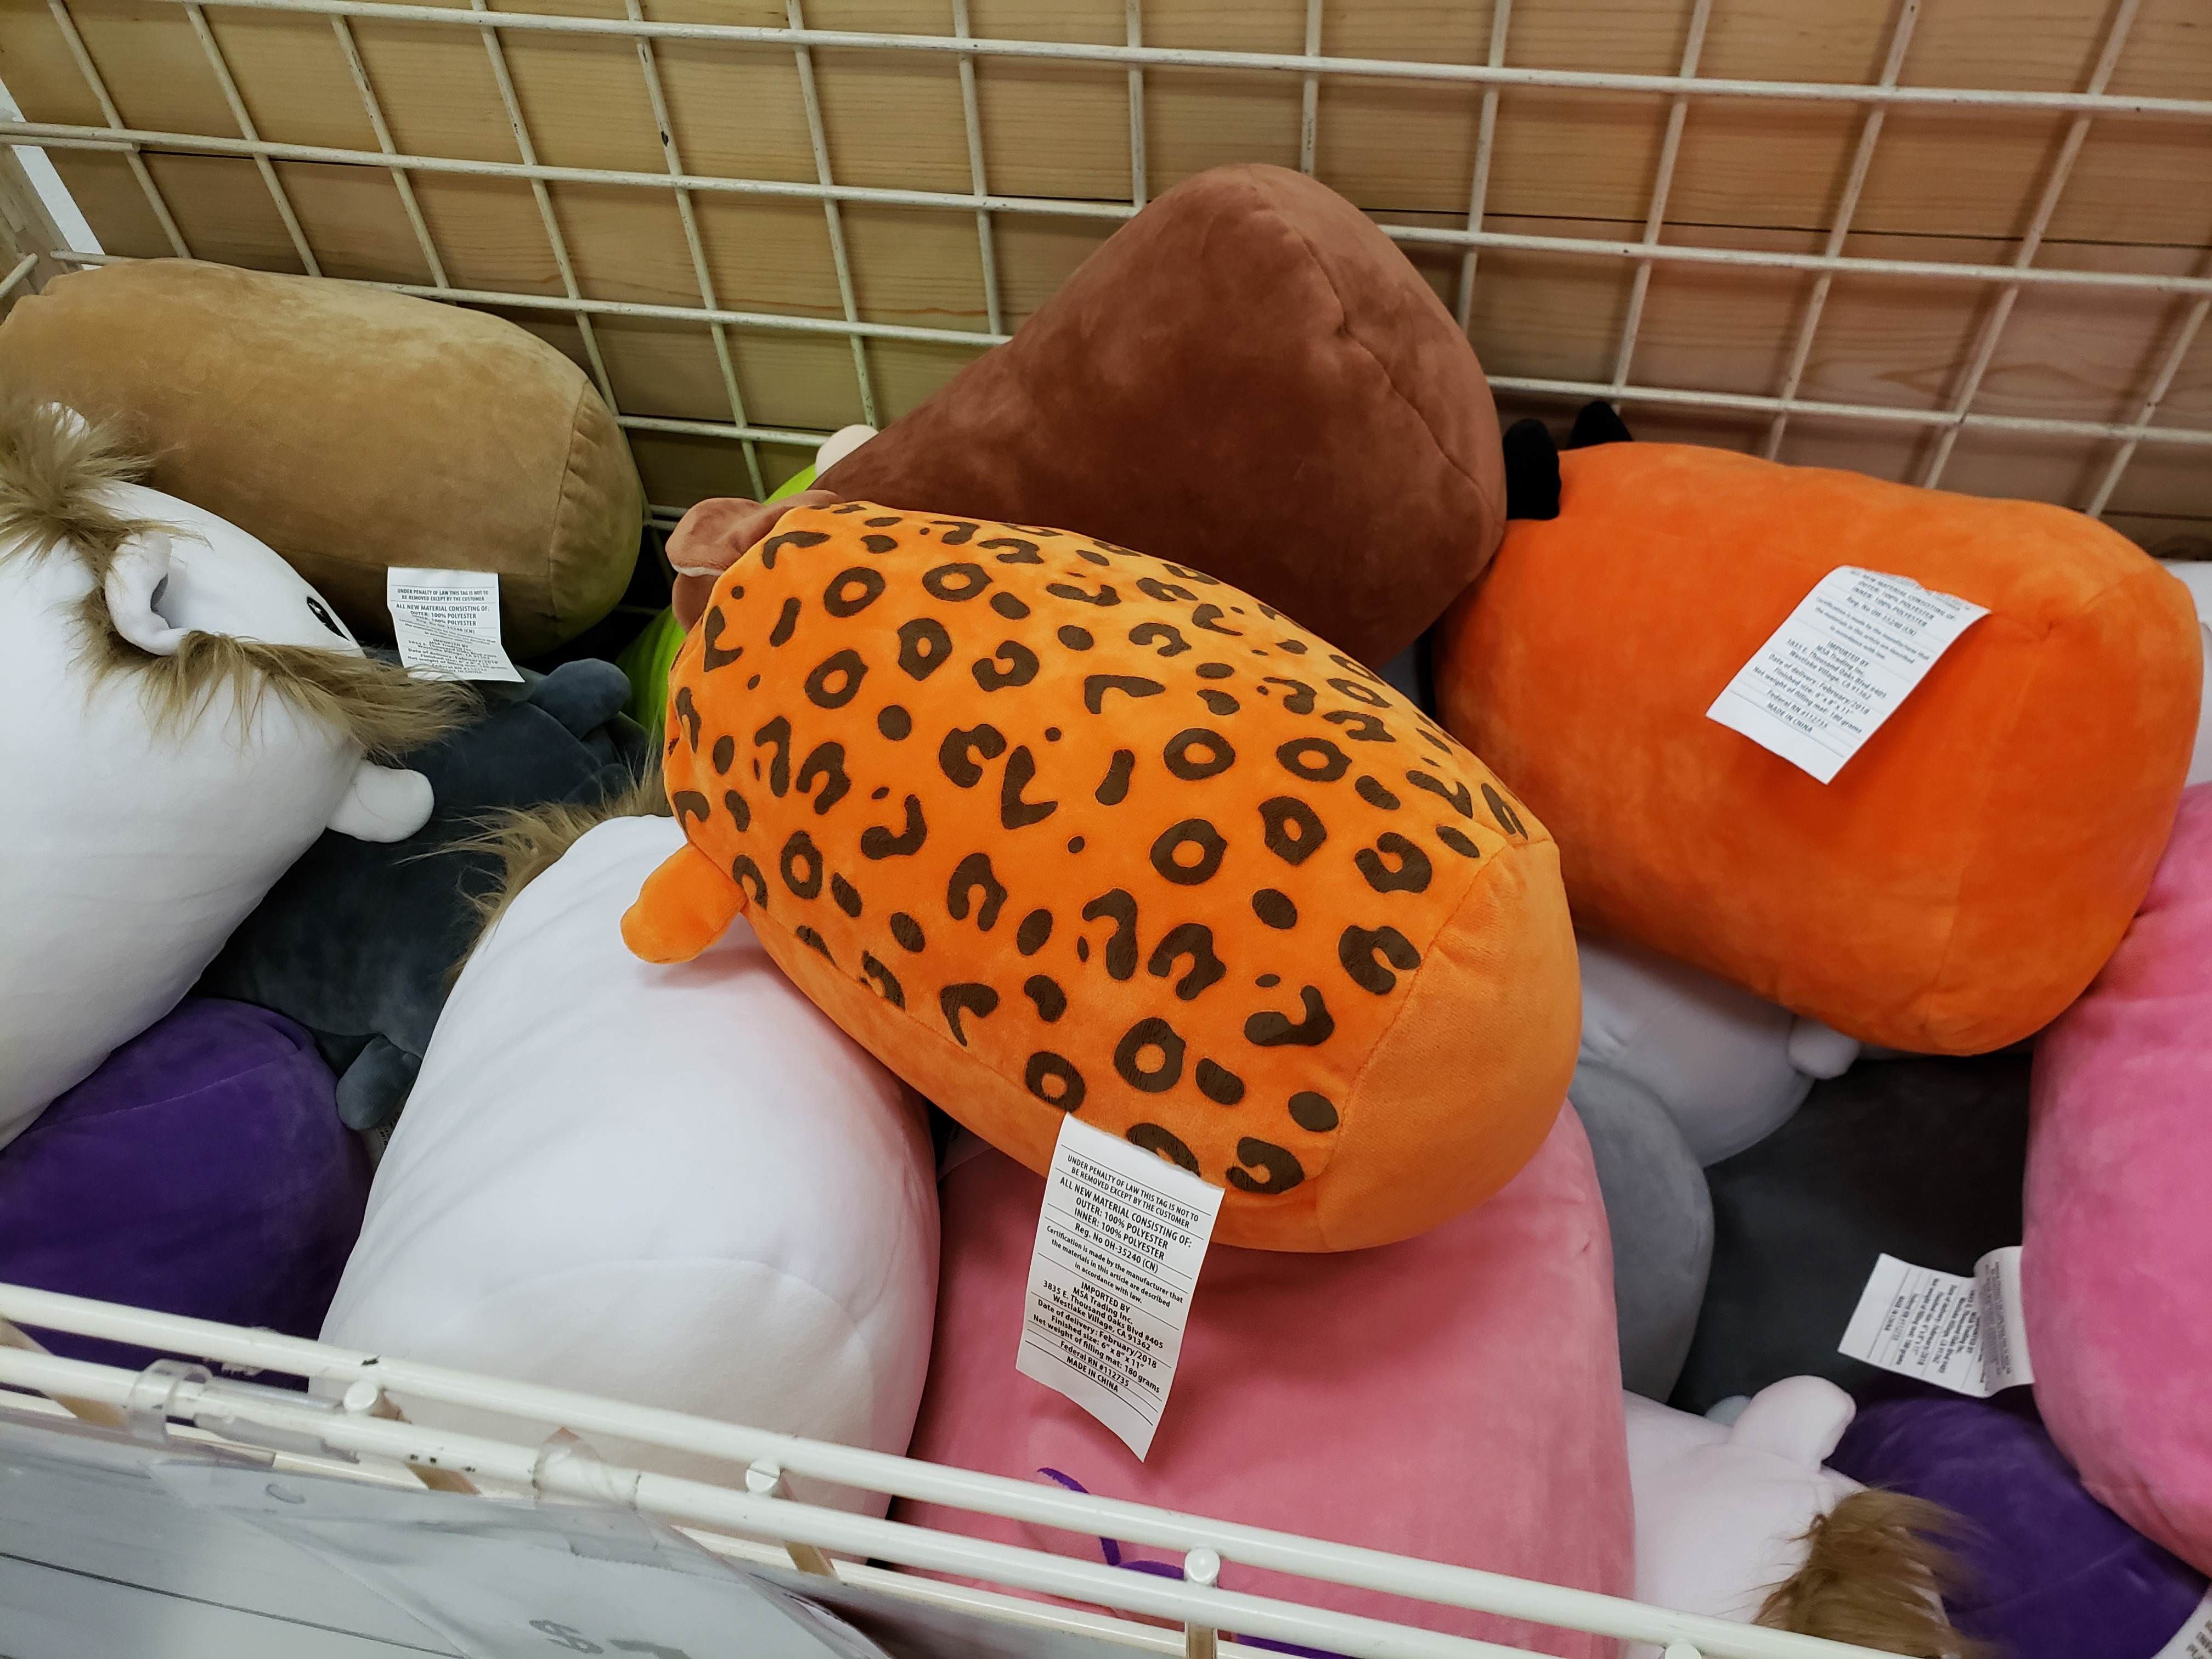 Kids say the darndest things. My 6 year old grabbed the leopard pillow and yelled, "Look daddy! A pillow made out of mommy's underwear! "